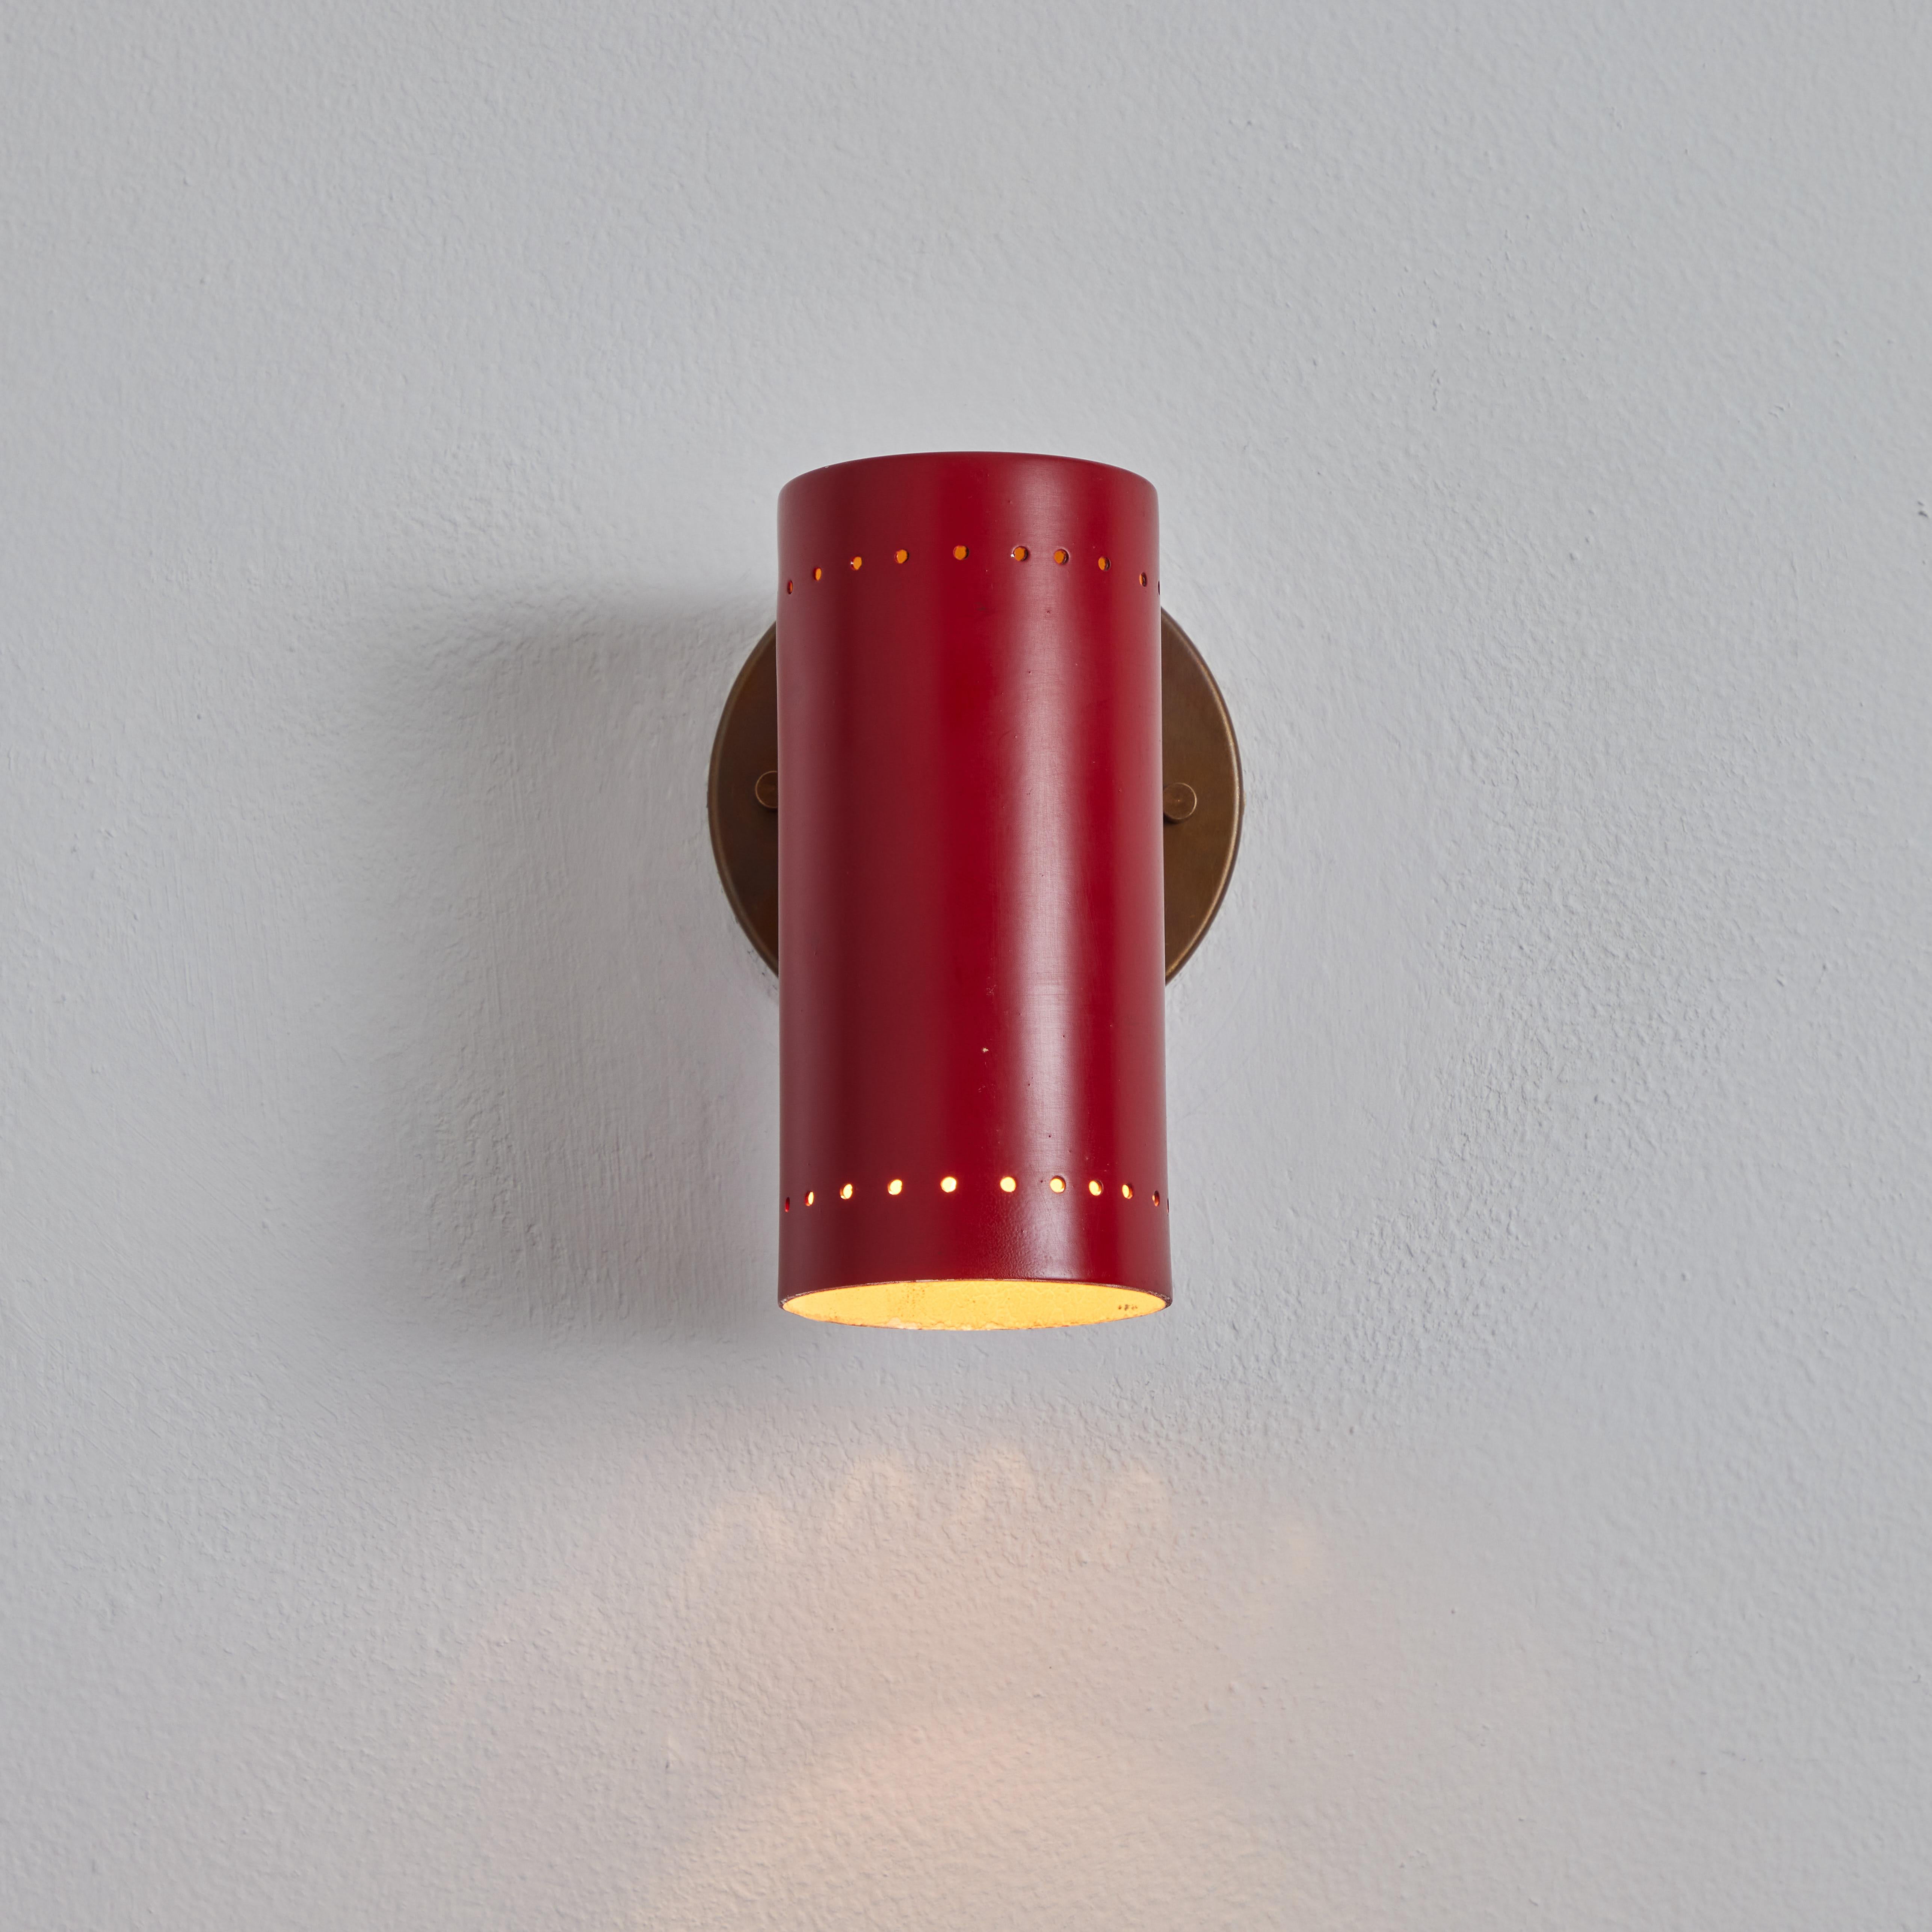 Pair of 1960s Tito Agnoli red and brass Articulating sconces for O-Luce. One of his most highly refined Minimalist designs. Sleek and functional yet at the same time bright and playful. A highly adjustable wall light, the tubular shade rotates